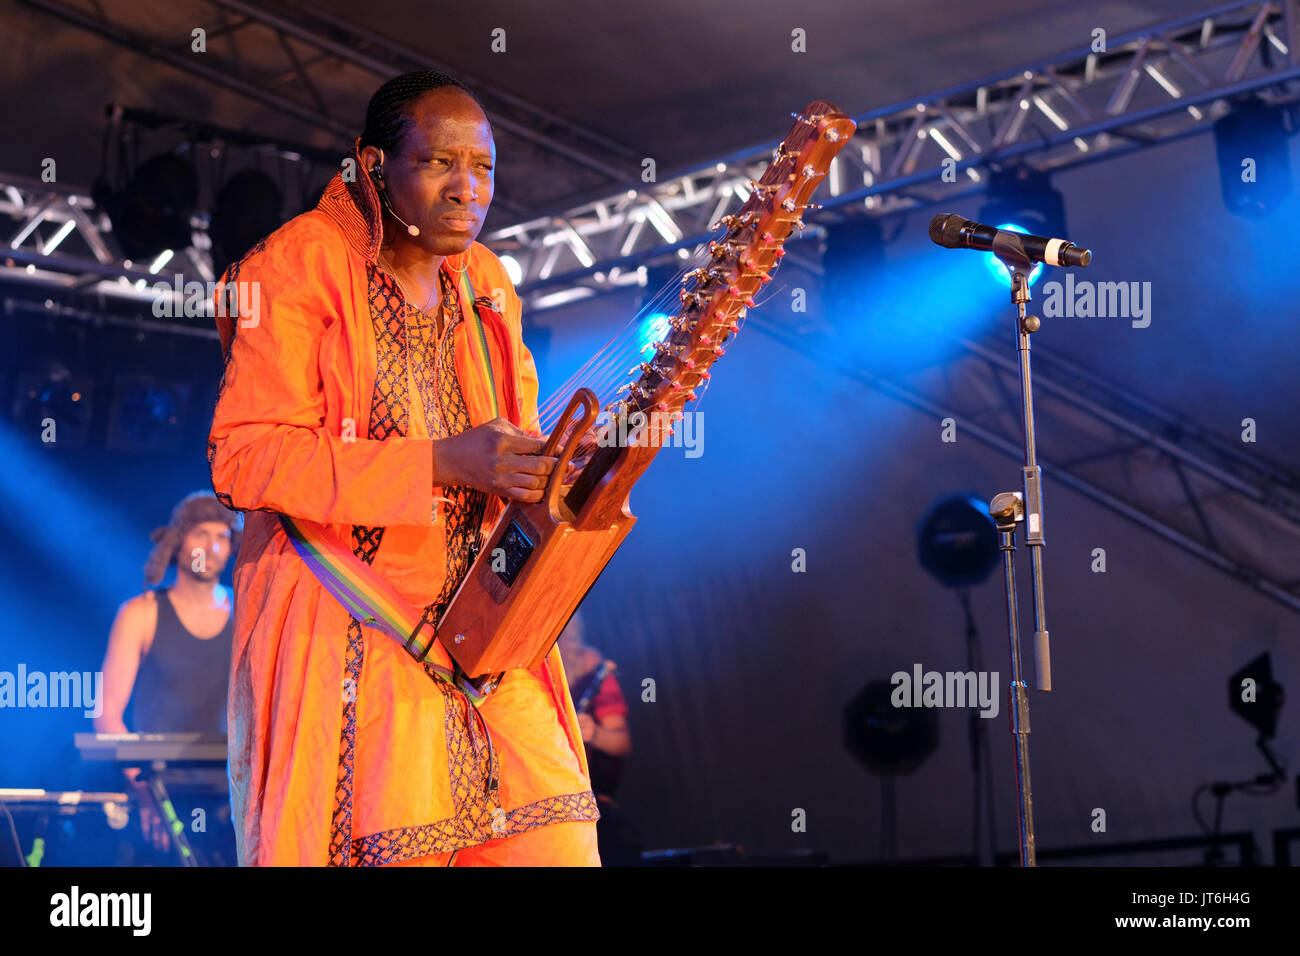 N'Faly Kouyate of the Afro Celt Sound System performing at the WOMAD Festival, Charlton Park, Malmesbury, Wiltshire, England, July 29, 2017 Stock Photo